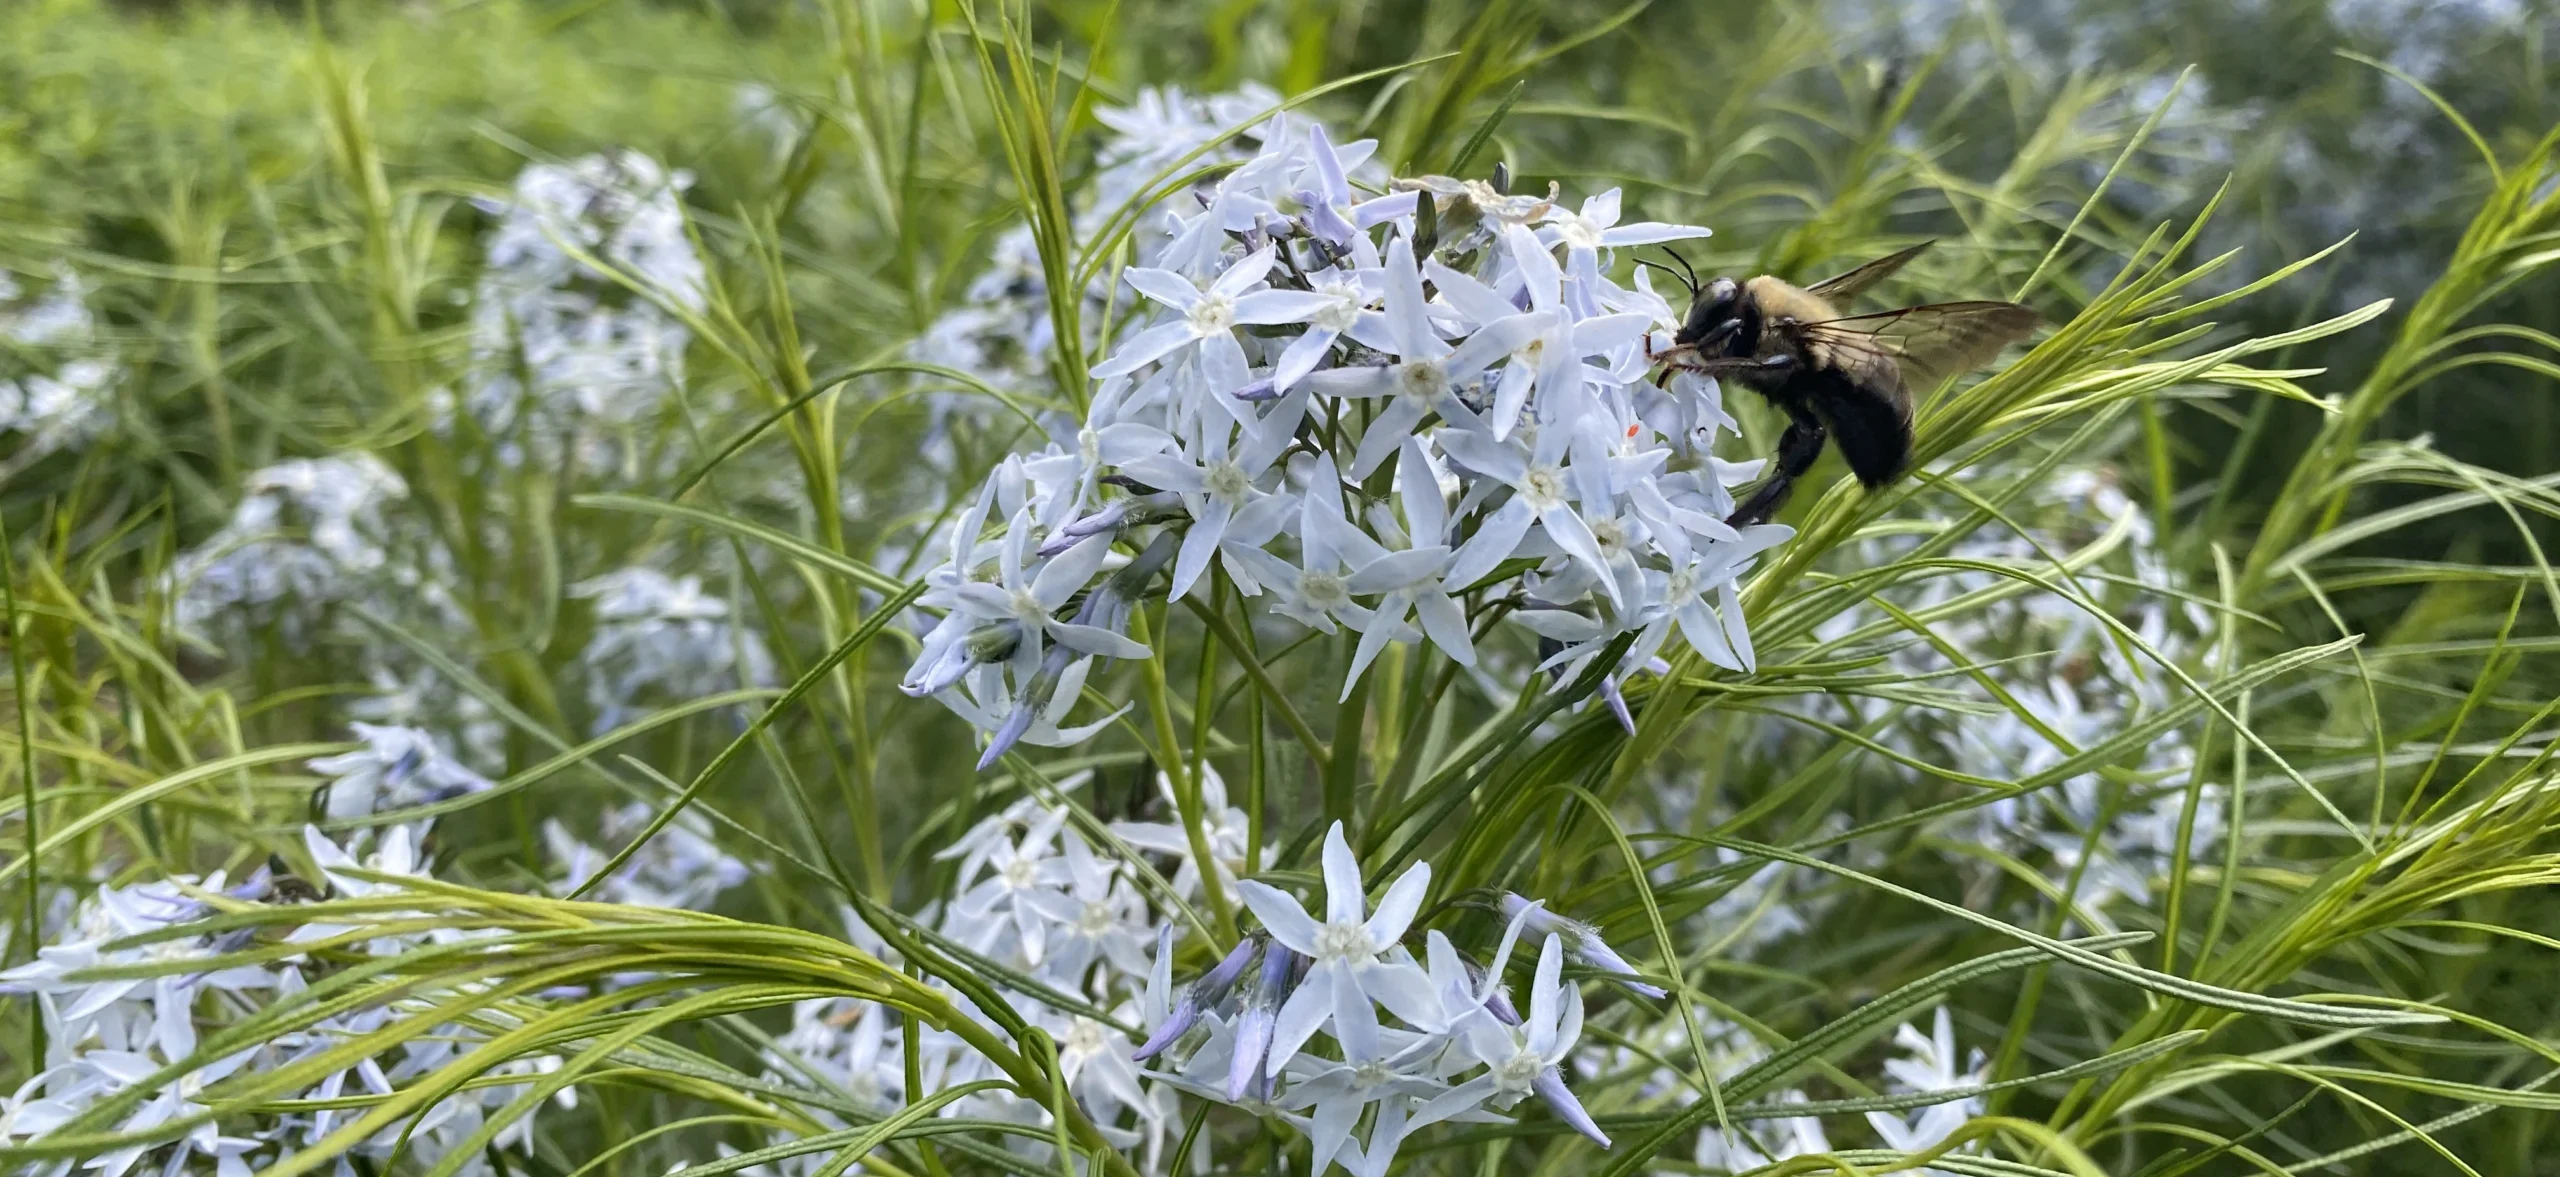 A bee visits the flower of an amsonia tabernaemontana in beautiful bloom, planted in a rain garden at Broadlands HOA, Loudoun County. Photo credit BJ Lecrone.